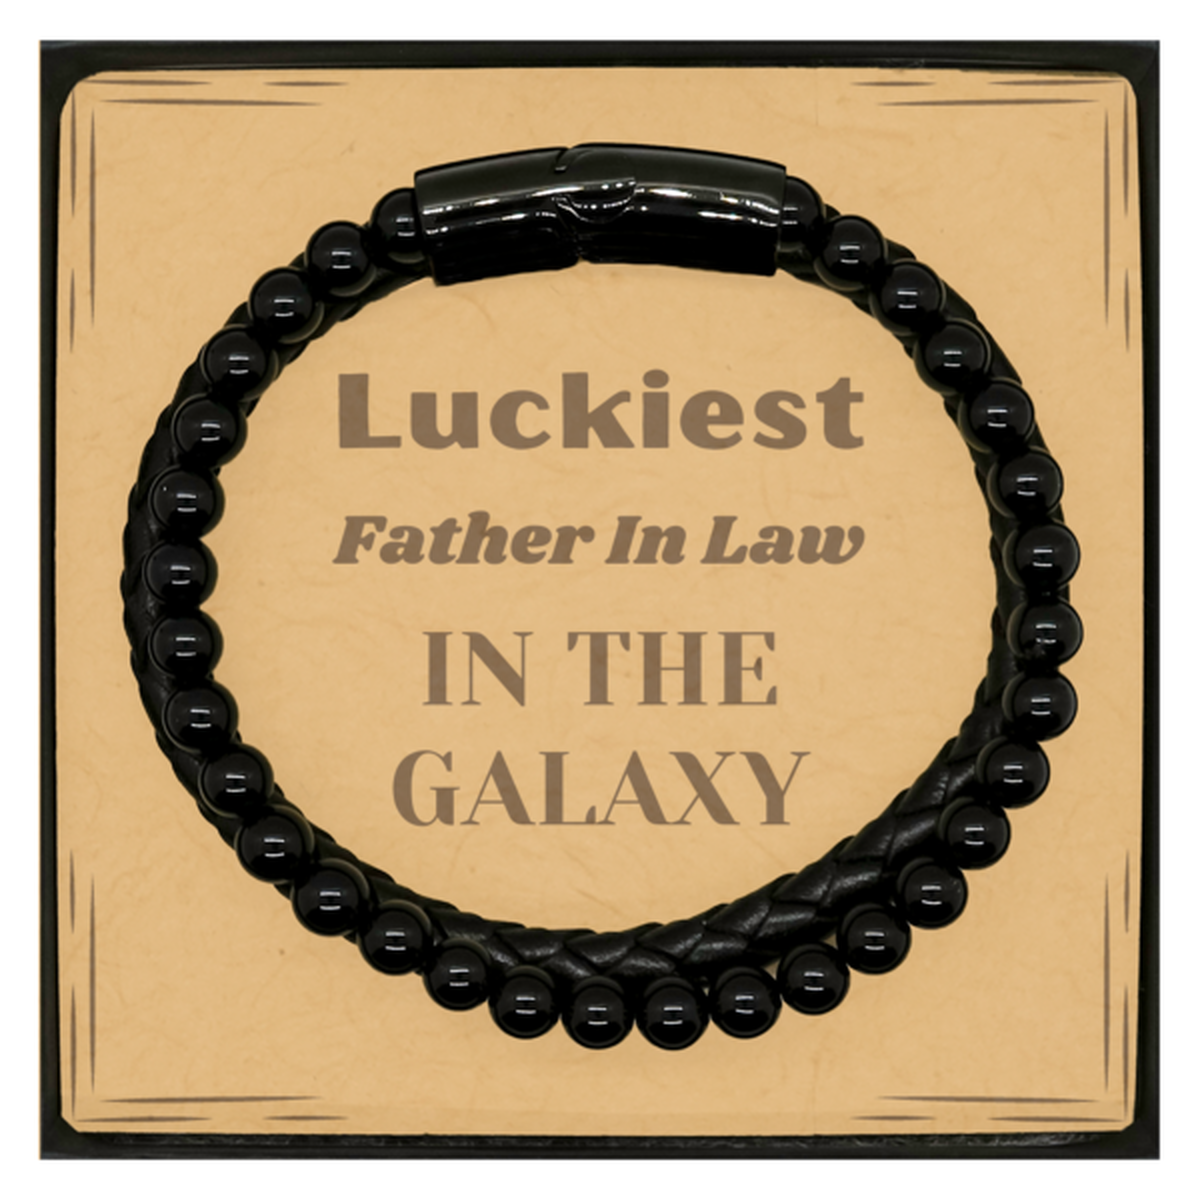 Luckiest Father In Law in the Galaxy, To My Father In Law Message Card Gifts, Christmas Father In Law Stone Leather Bracelets Gifts, X-mas Birthday Unique Gifts For Father In Law Men Women